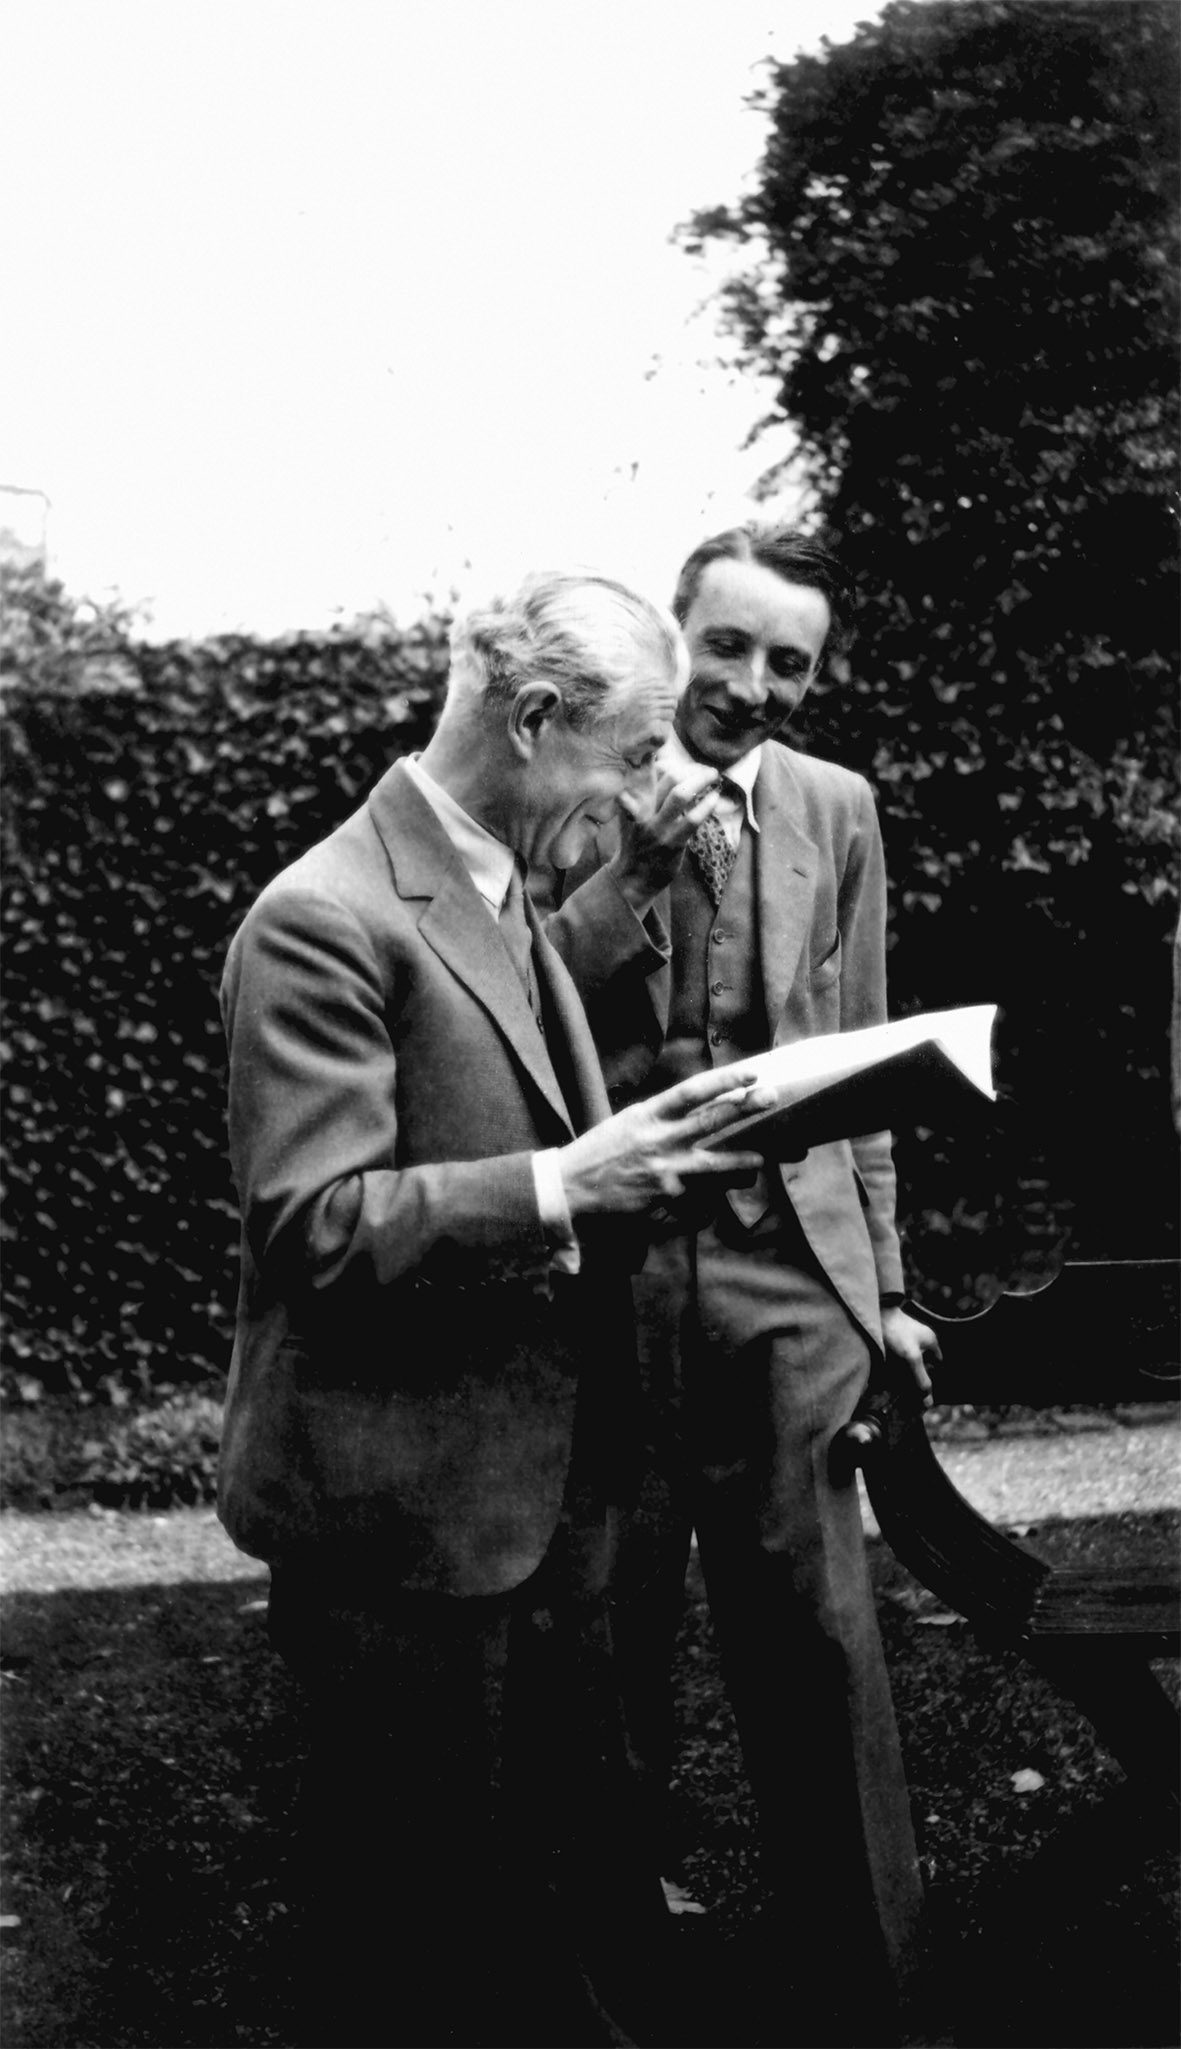 Lennox Berkeley in London in c. 1925 with Maurice Ravel, who first introduced him to Nadia Boulanger.